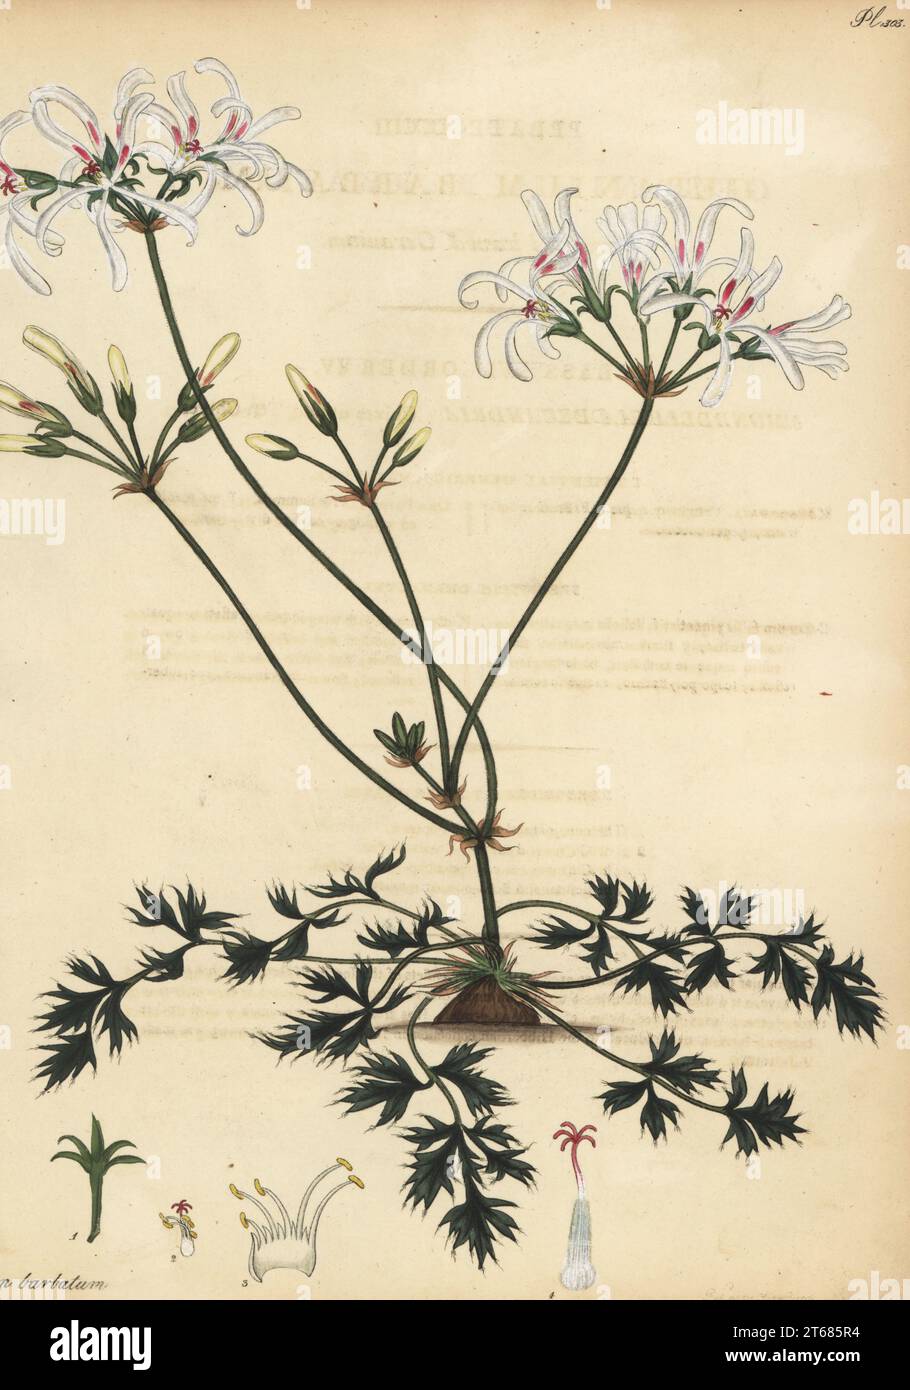 Pelargonium barbatum. Bearded-leaved geranium, Geranium barbatum. From the Cape of Good Hope, South Africa, in the George Hibbert collection. Copperplate engraving drawn, engraved and hand-coloured by Henry Andrews from his Botanical Register, Volume 5, self-published in Knightsbridge, London, 1803. Stock Photo